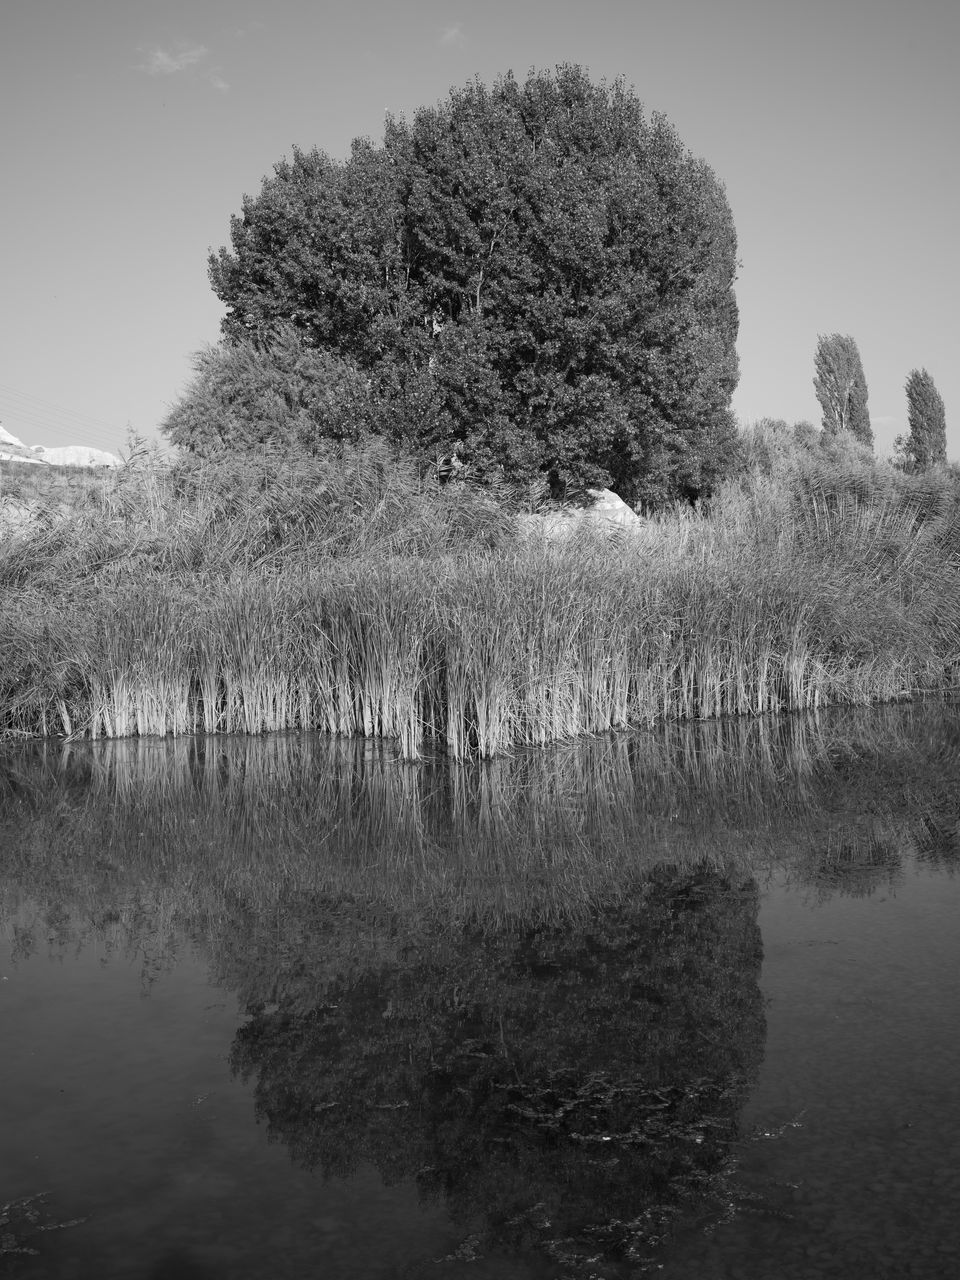 plant, tree, black and white, reflection, nature, water, monochrome, monochrome photography, sky, tranquility, scenics - nature, beauty in nature, landscape, no people, lake, environment, tranquil scene, land, mist, growth, winter, non-urban scene, outdoors, morning, day, grass, travel destinations